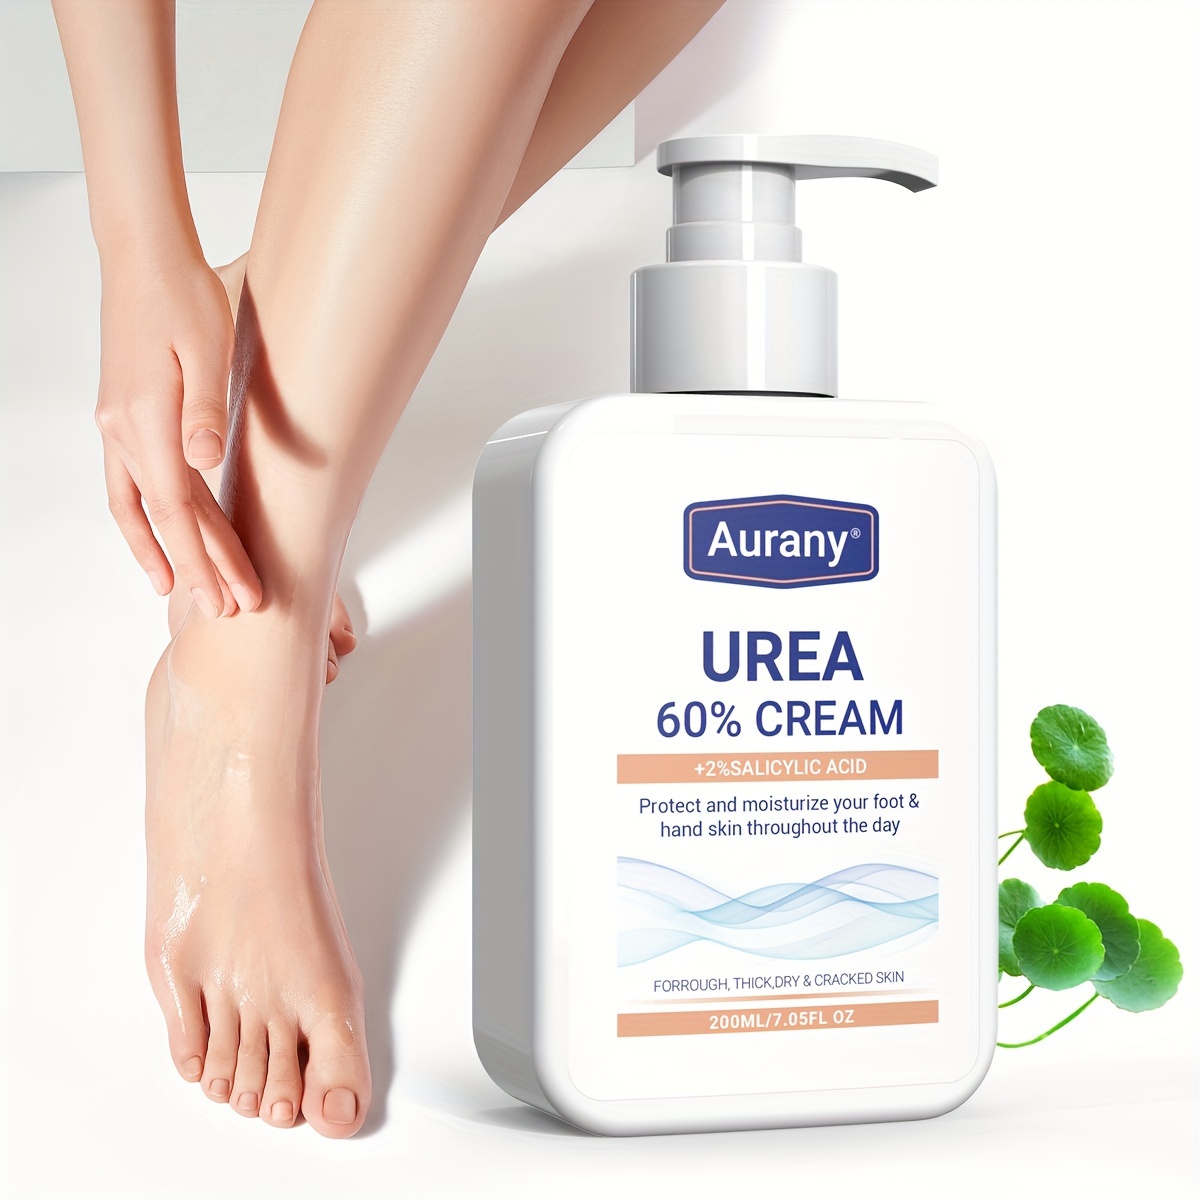 

200ml Urea Cream 60% For Feet, Urea Foot Cream For Dry Cracked Heels Feet Knees Elbows, 60% Urea Lotion With 2% Salicylic Acid, Skin Care Product, Suitable For Feet, Knees, Elbows Plant Squalane